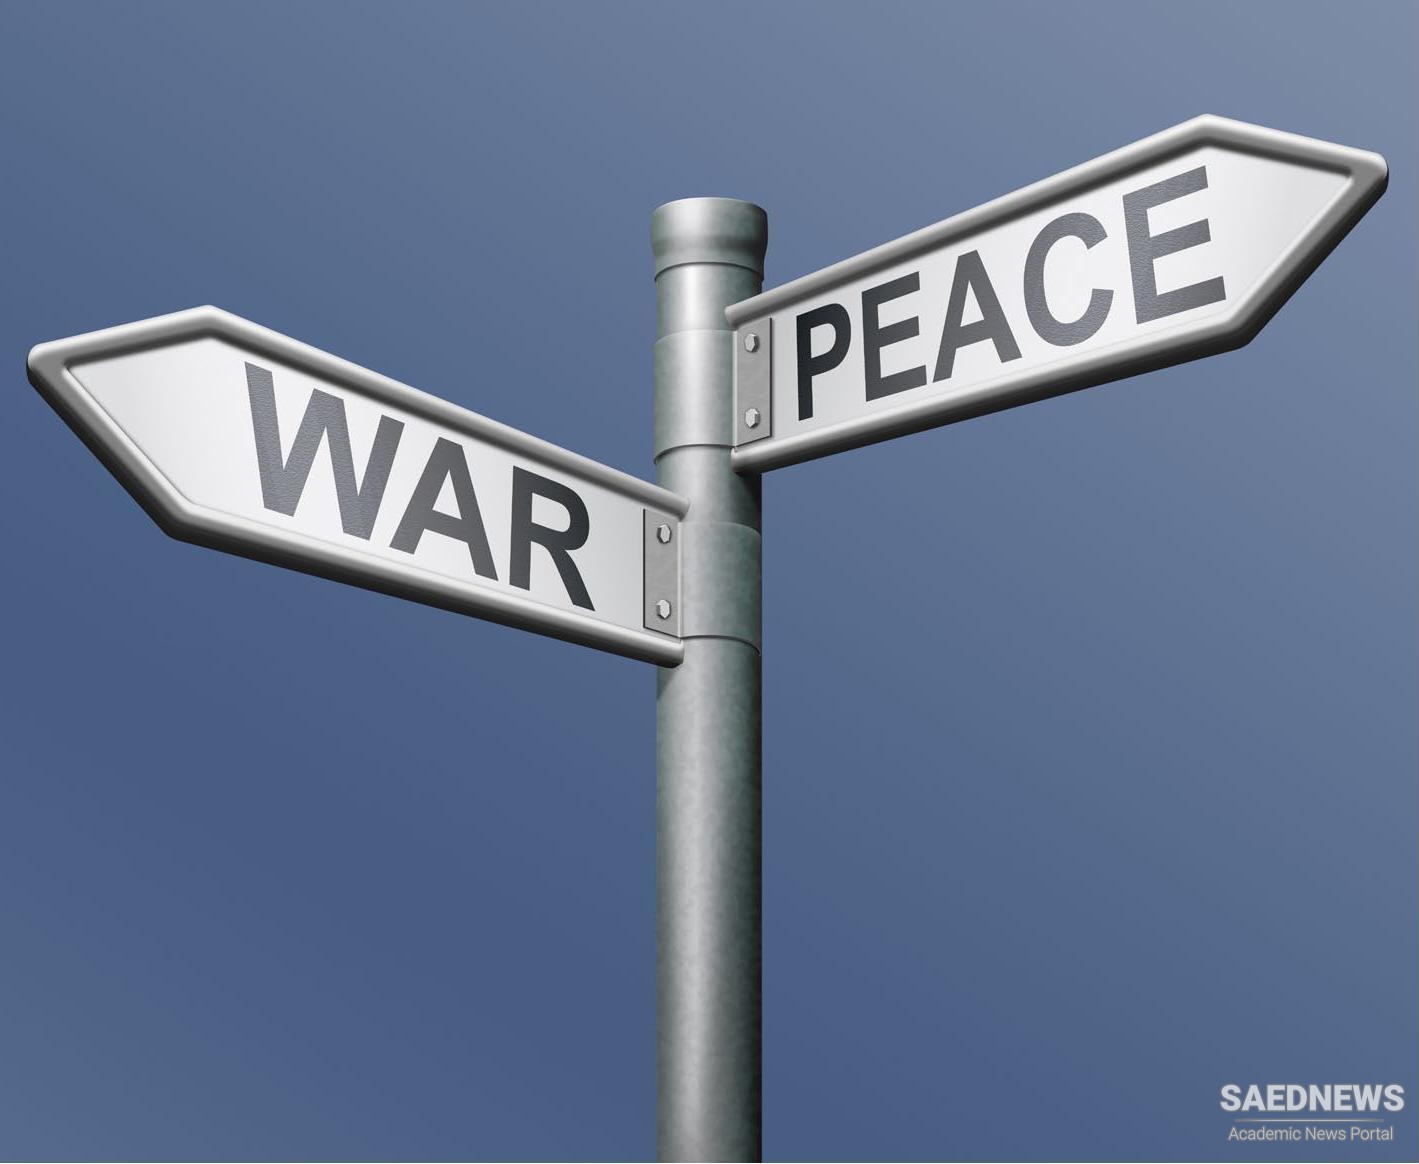 Peace as a Global Issue: Legacy of Conflicts